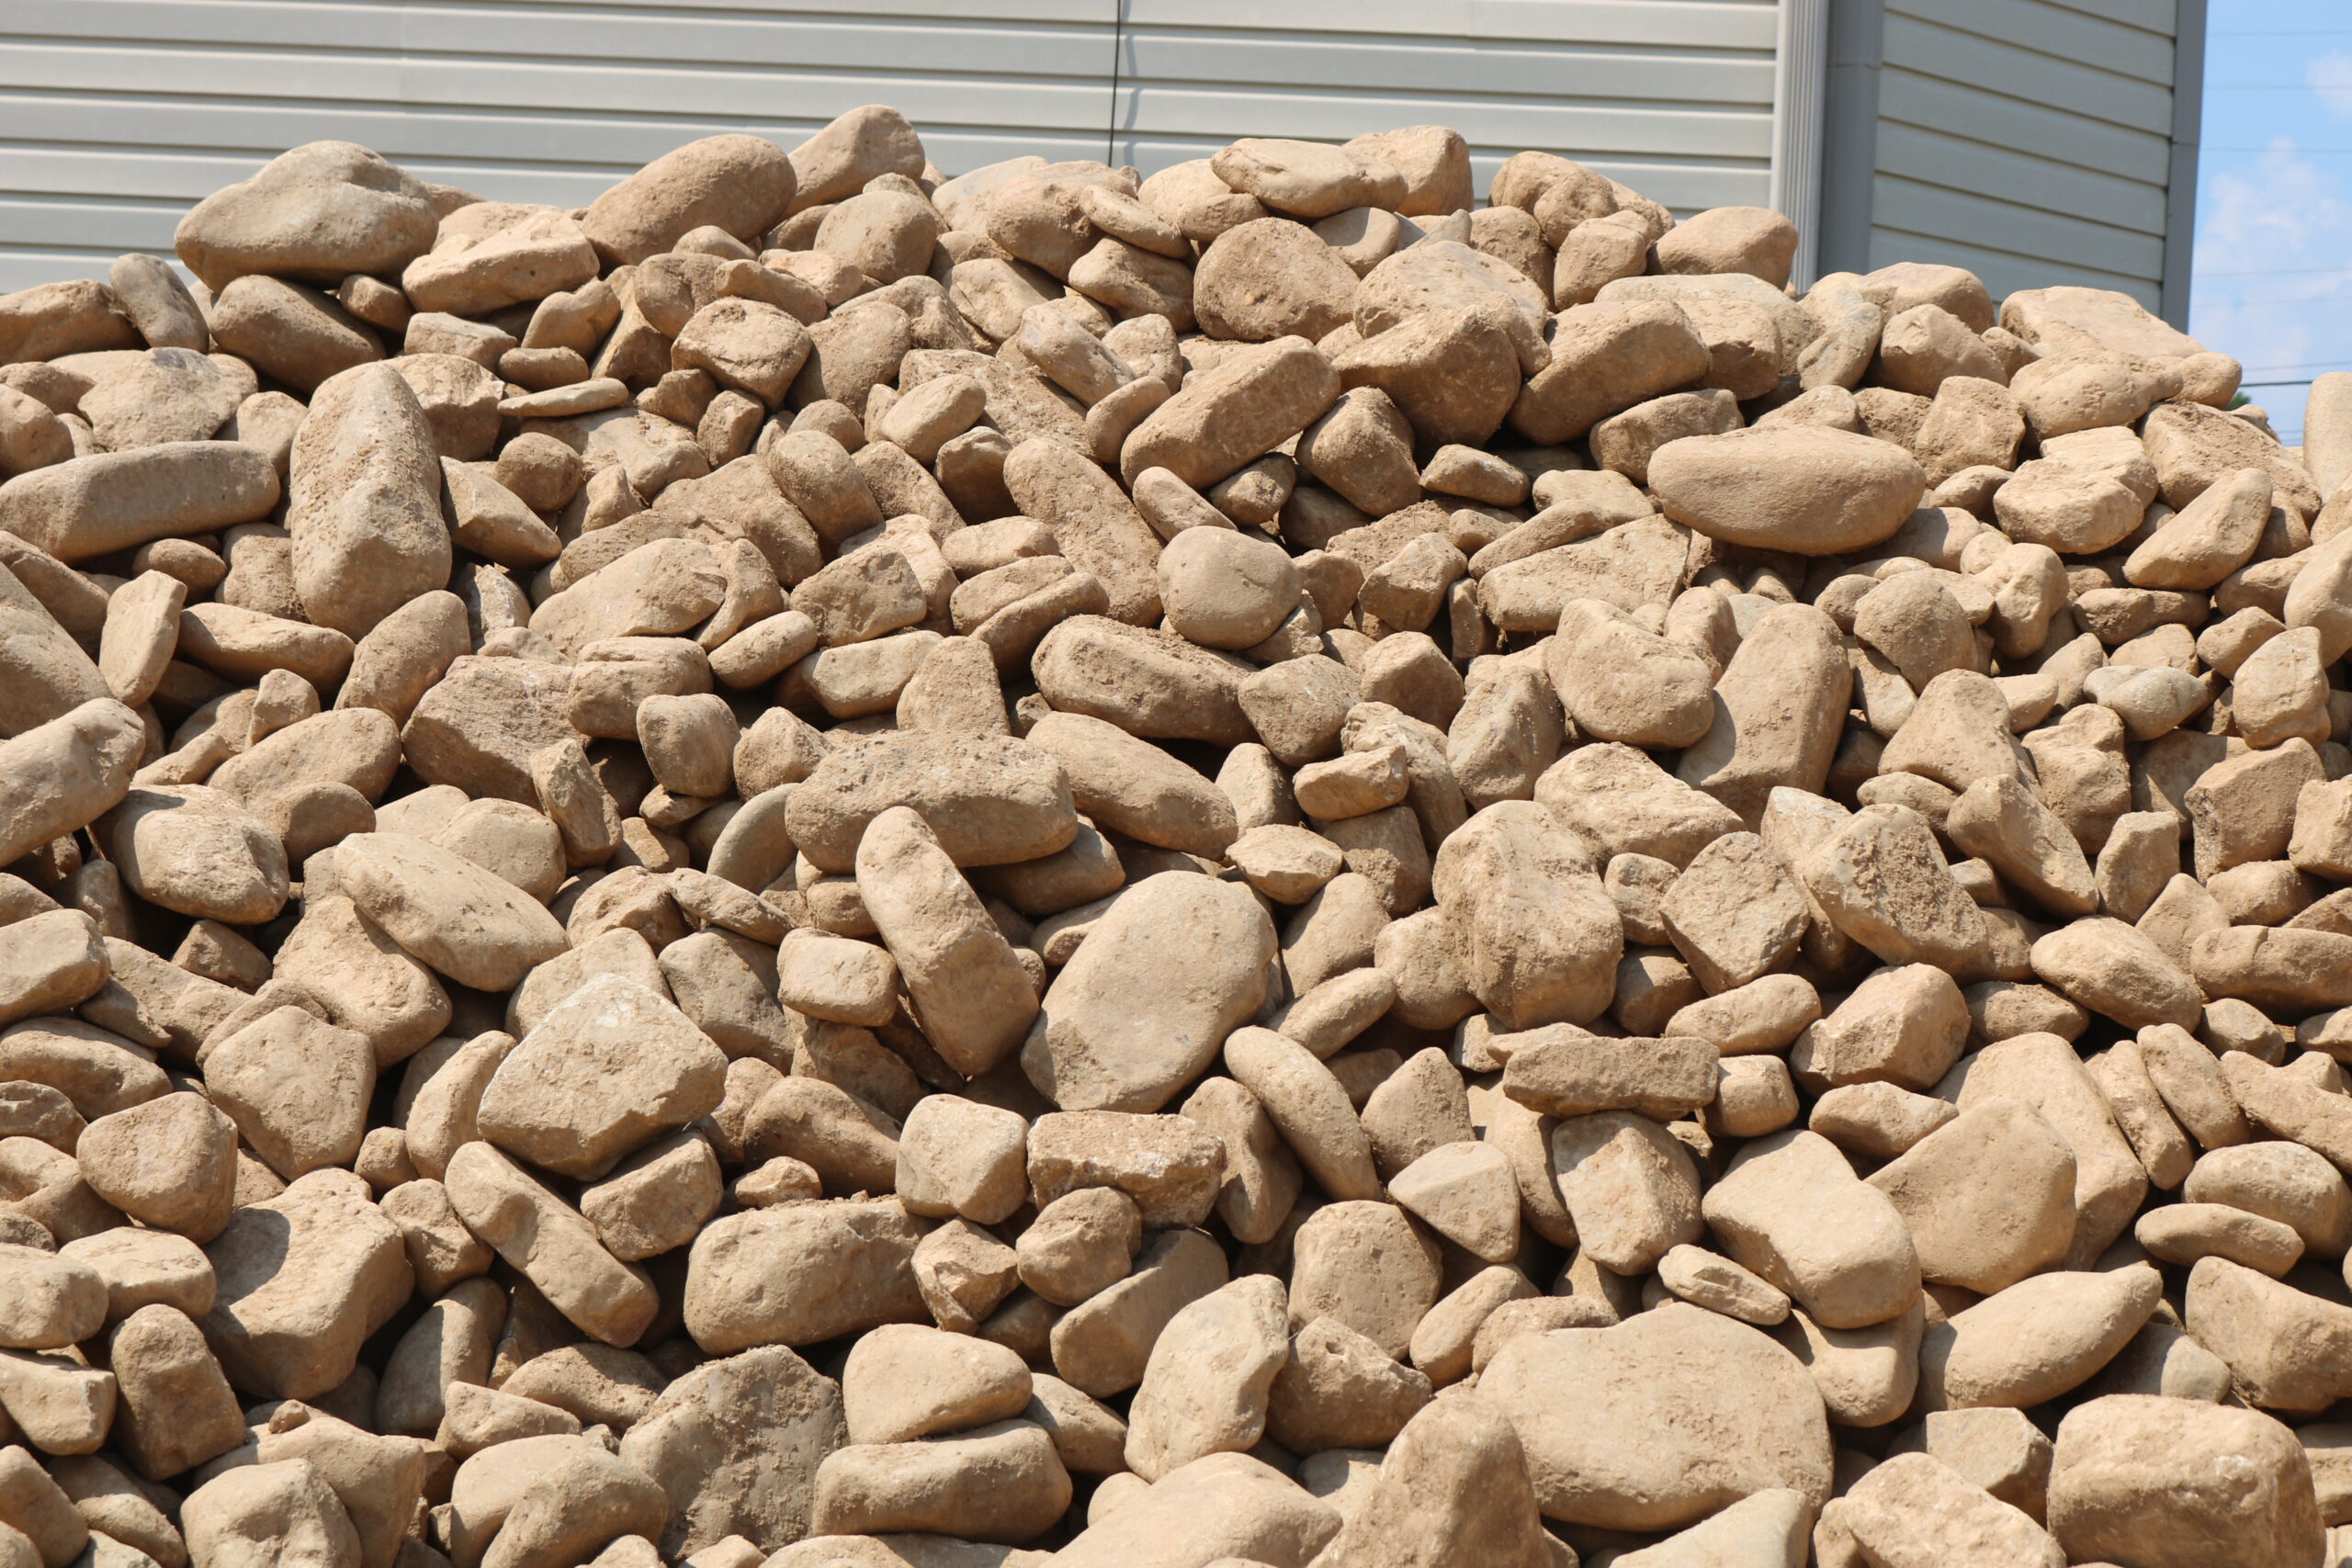 Bulk Pile of 4-8 Inch River Rock - Durable Stone from Pine Straw King